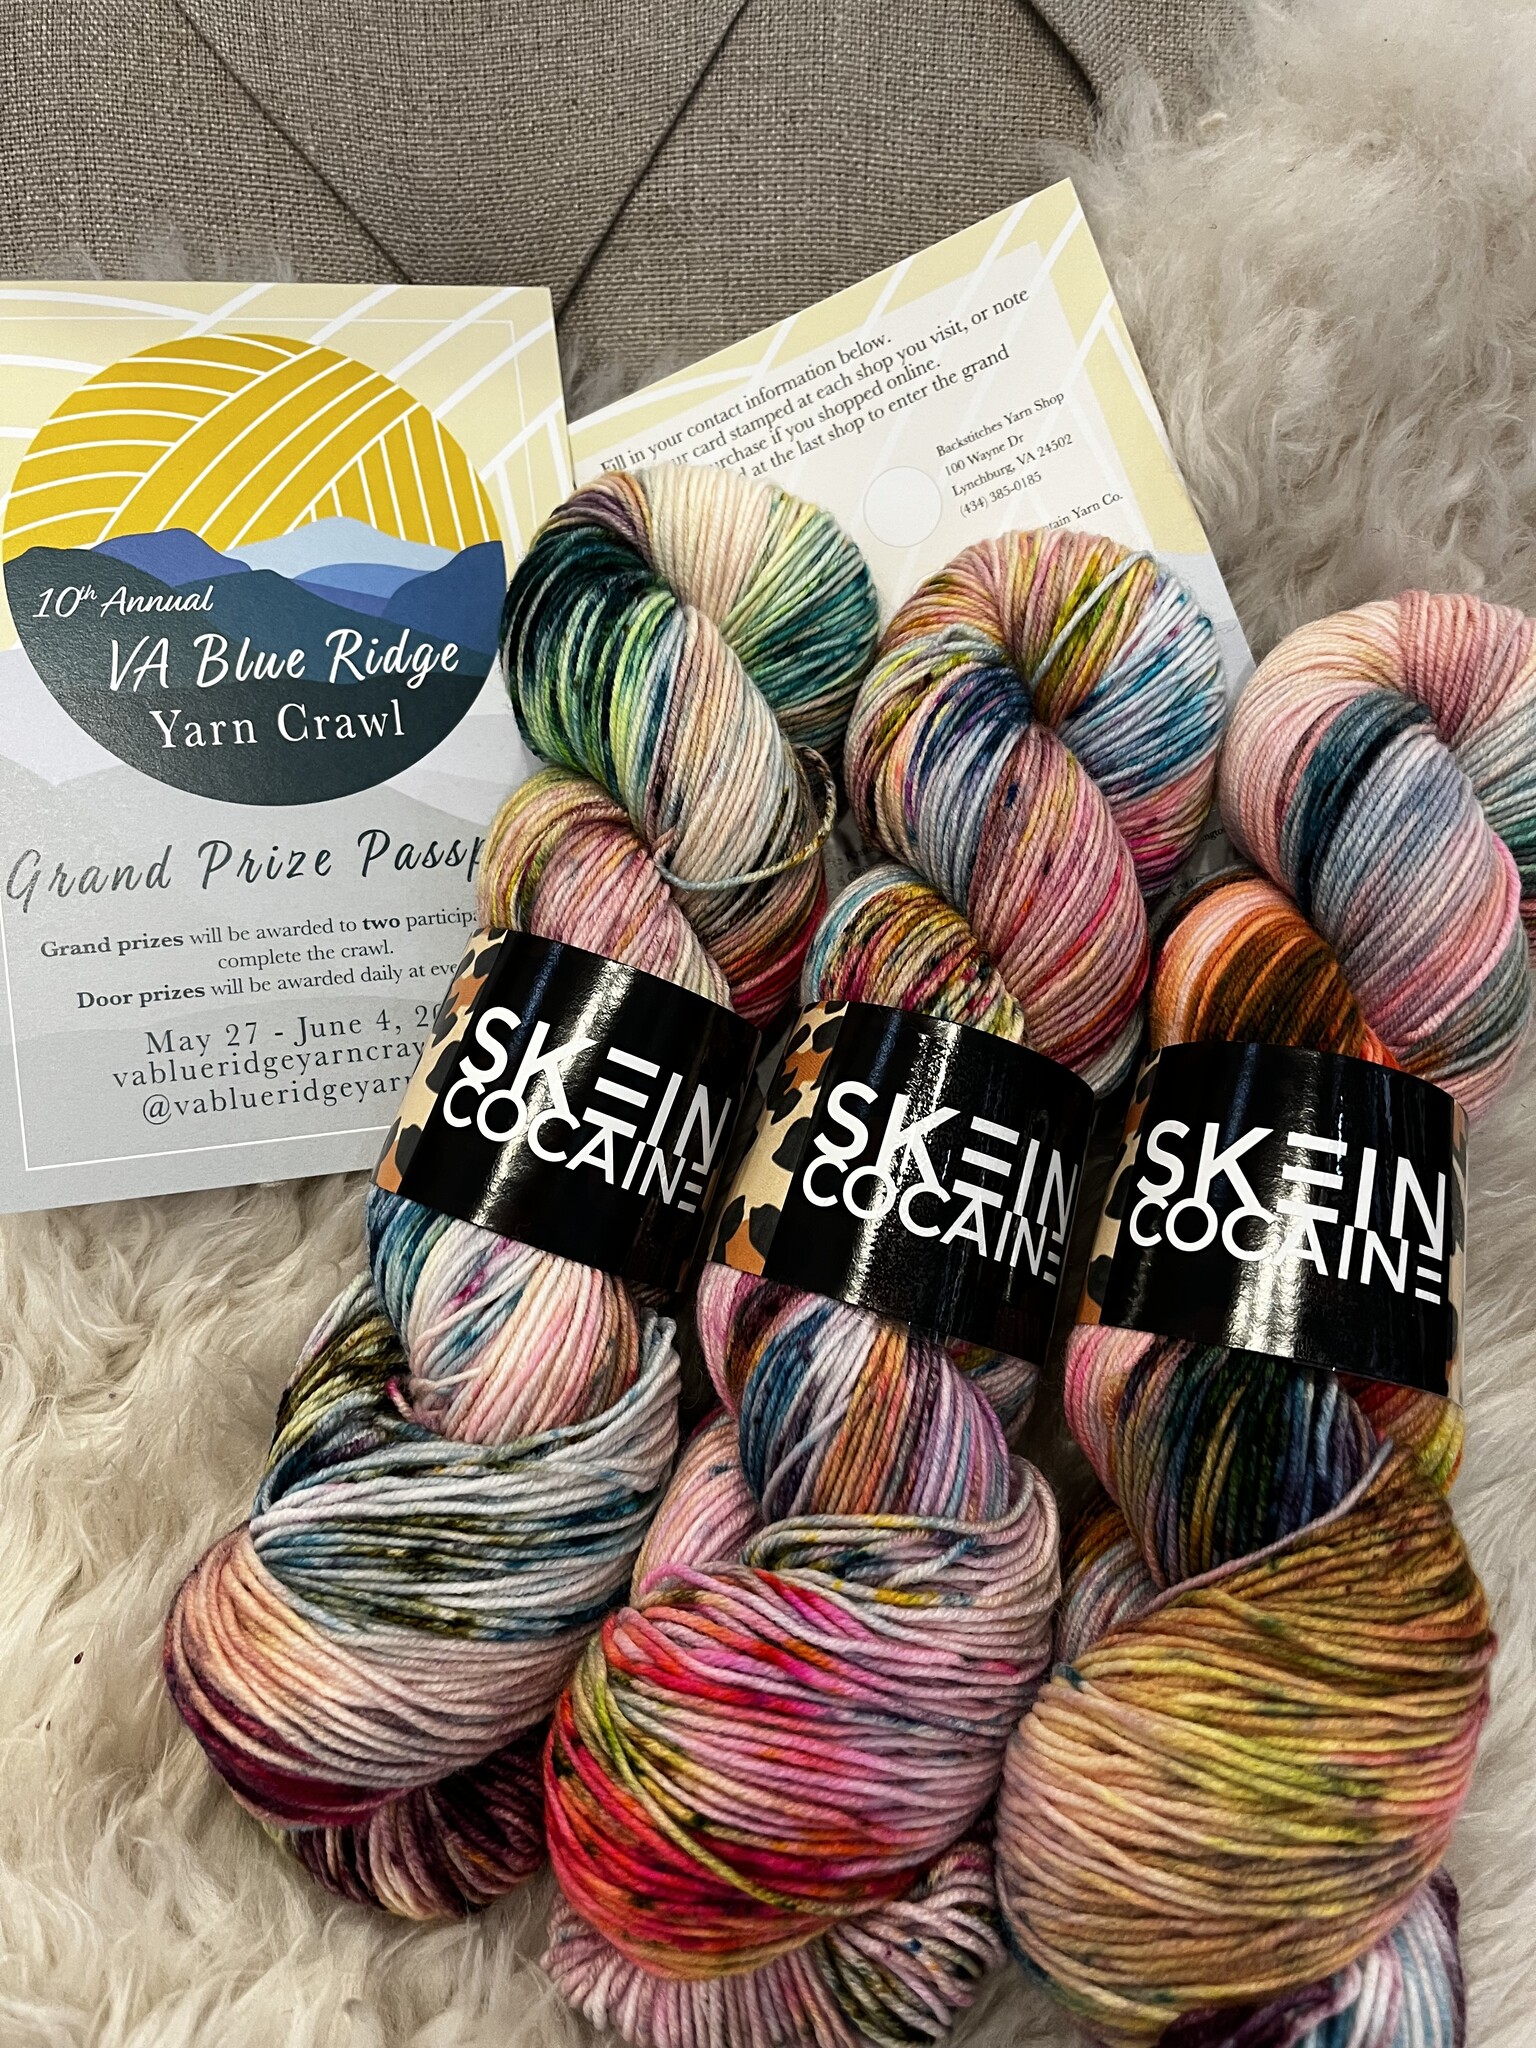 Has anyone ever encountered yarn being joined on the skein? : r/YarnAddicts